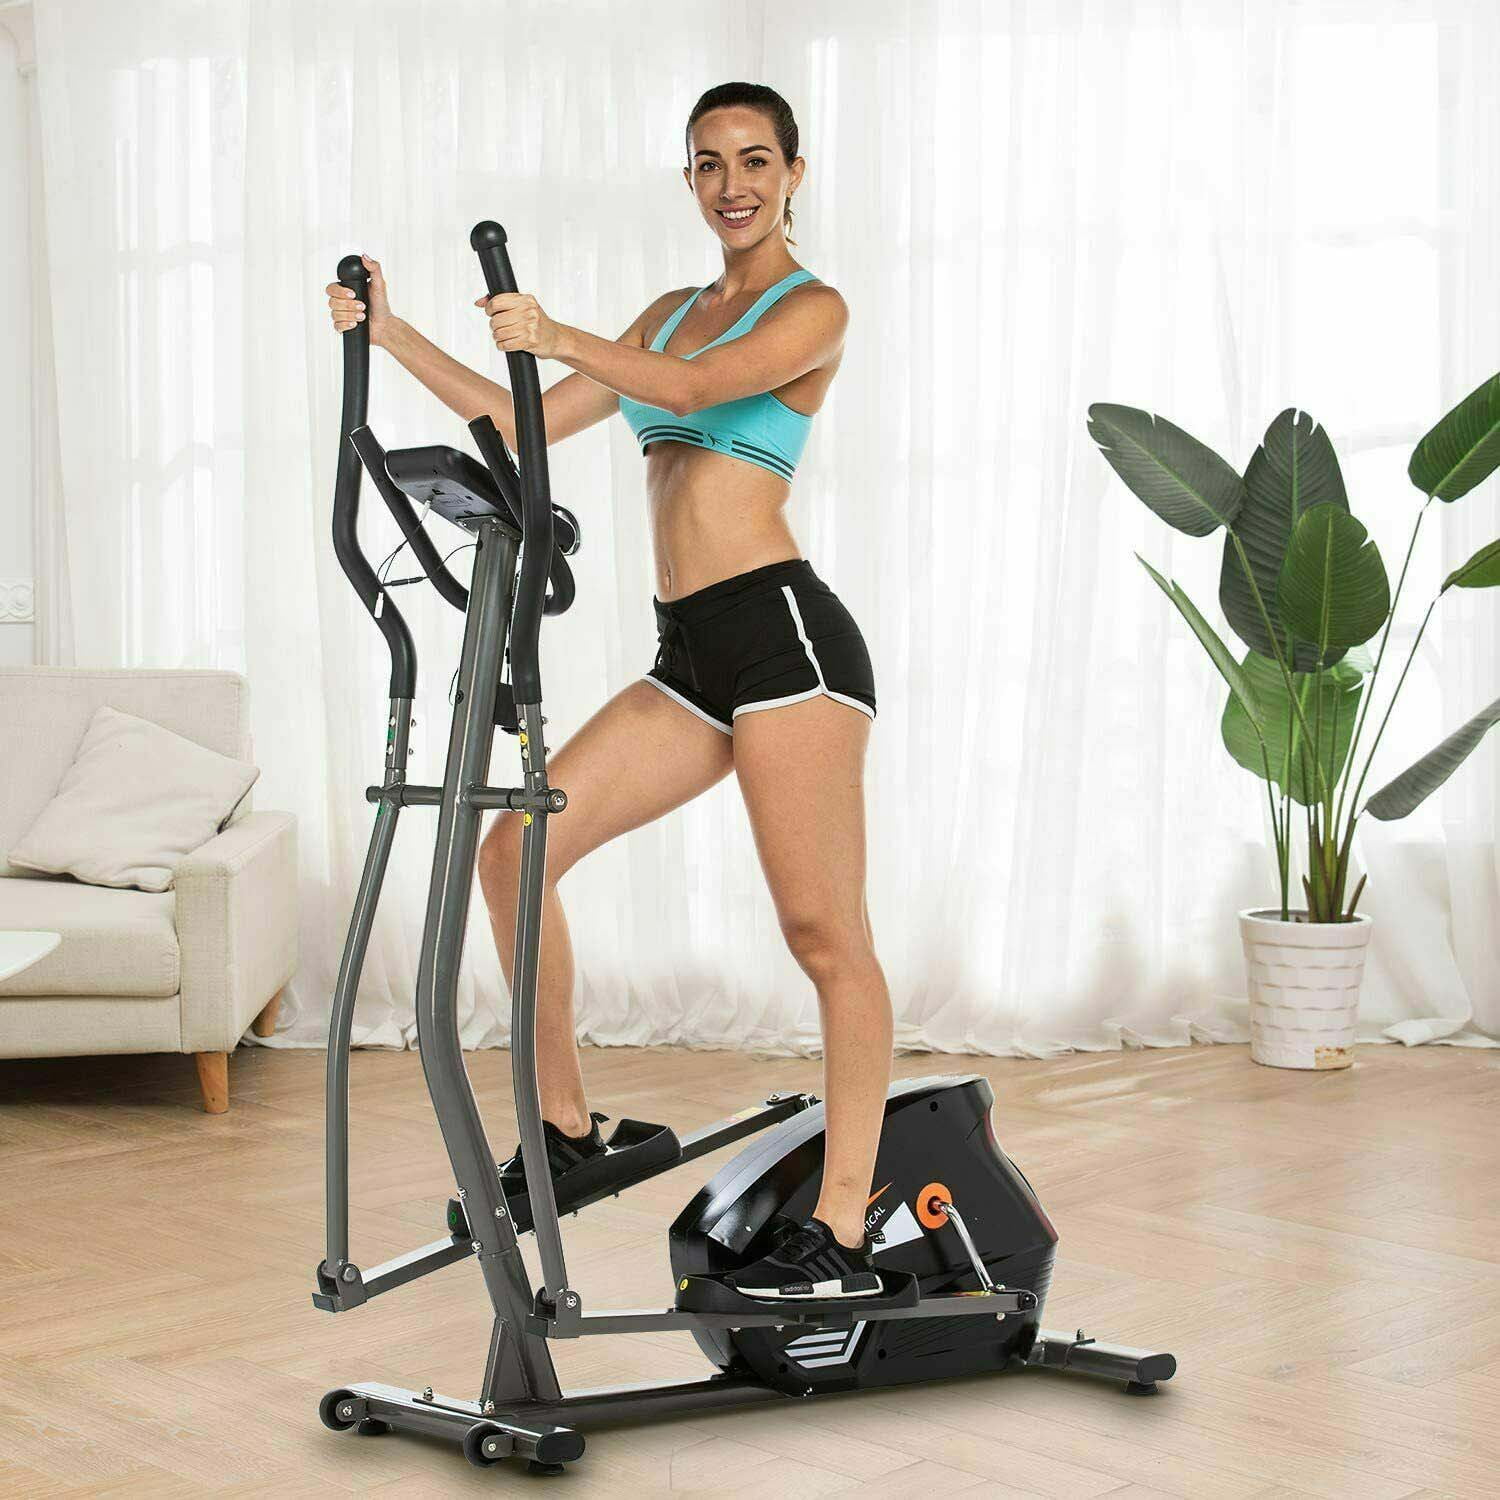 Programmable Monitor and Pulse Rate Grips Fitness Eliptical Exercise Machines with 13 Workout Programs 390 LB Max Weight 16 Levels Resistance FUNMILY E970 Electric Elliptical Trainers 